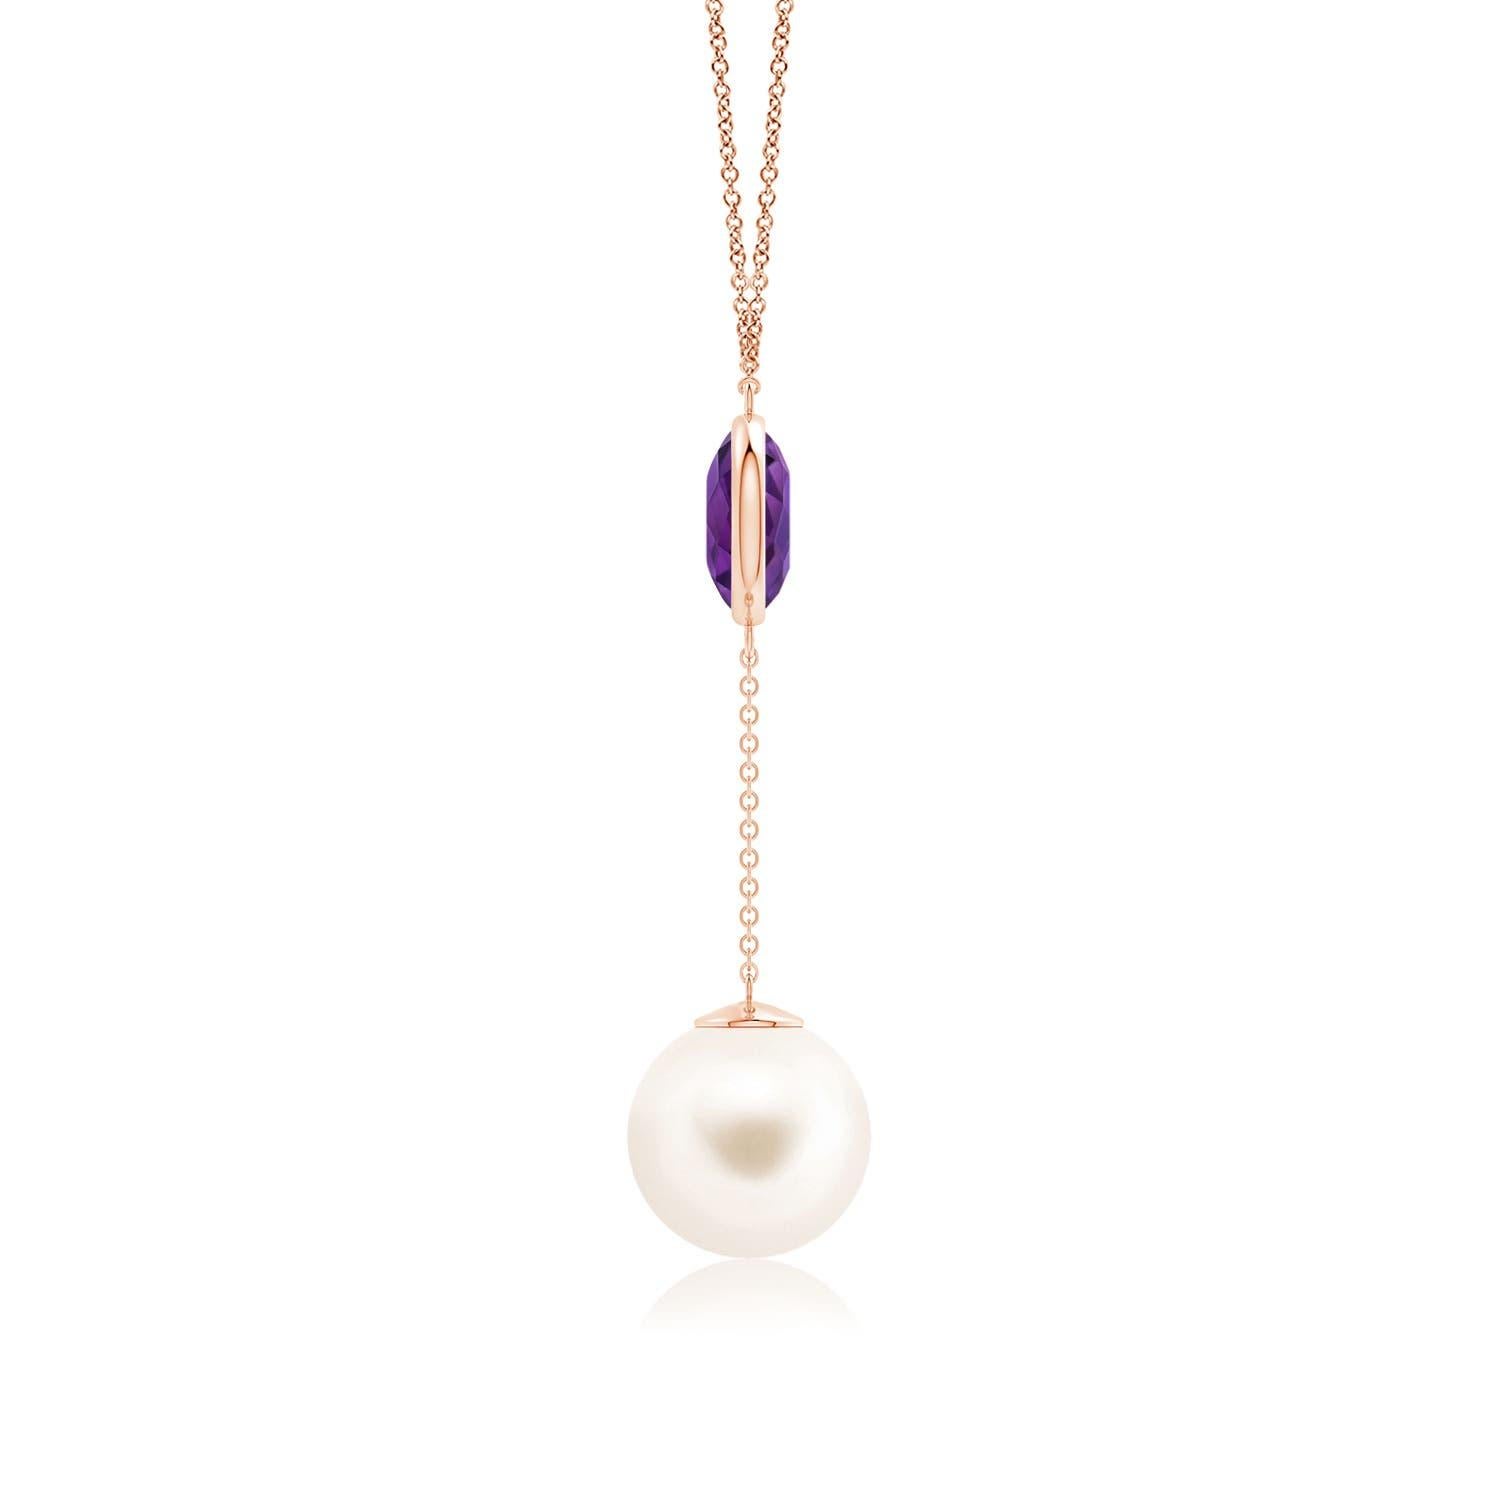 Cabochon Freshwater Cultured Pearl & 2.85ct Amethyst Lariat Necklace in 14K Rose Gold For Sale